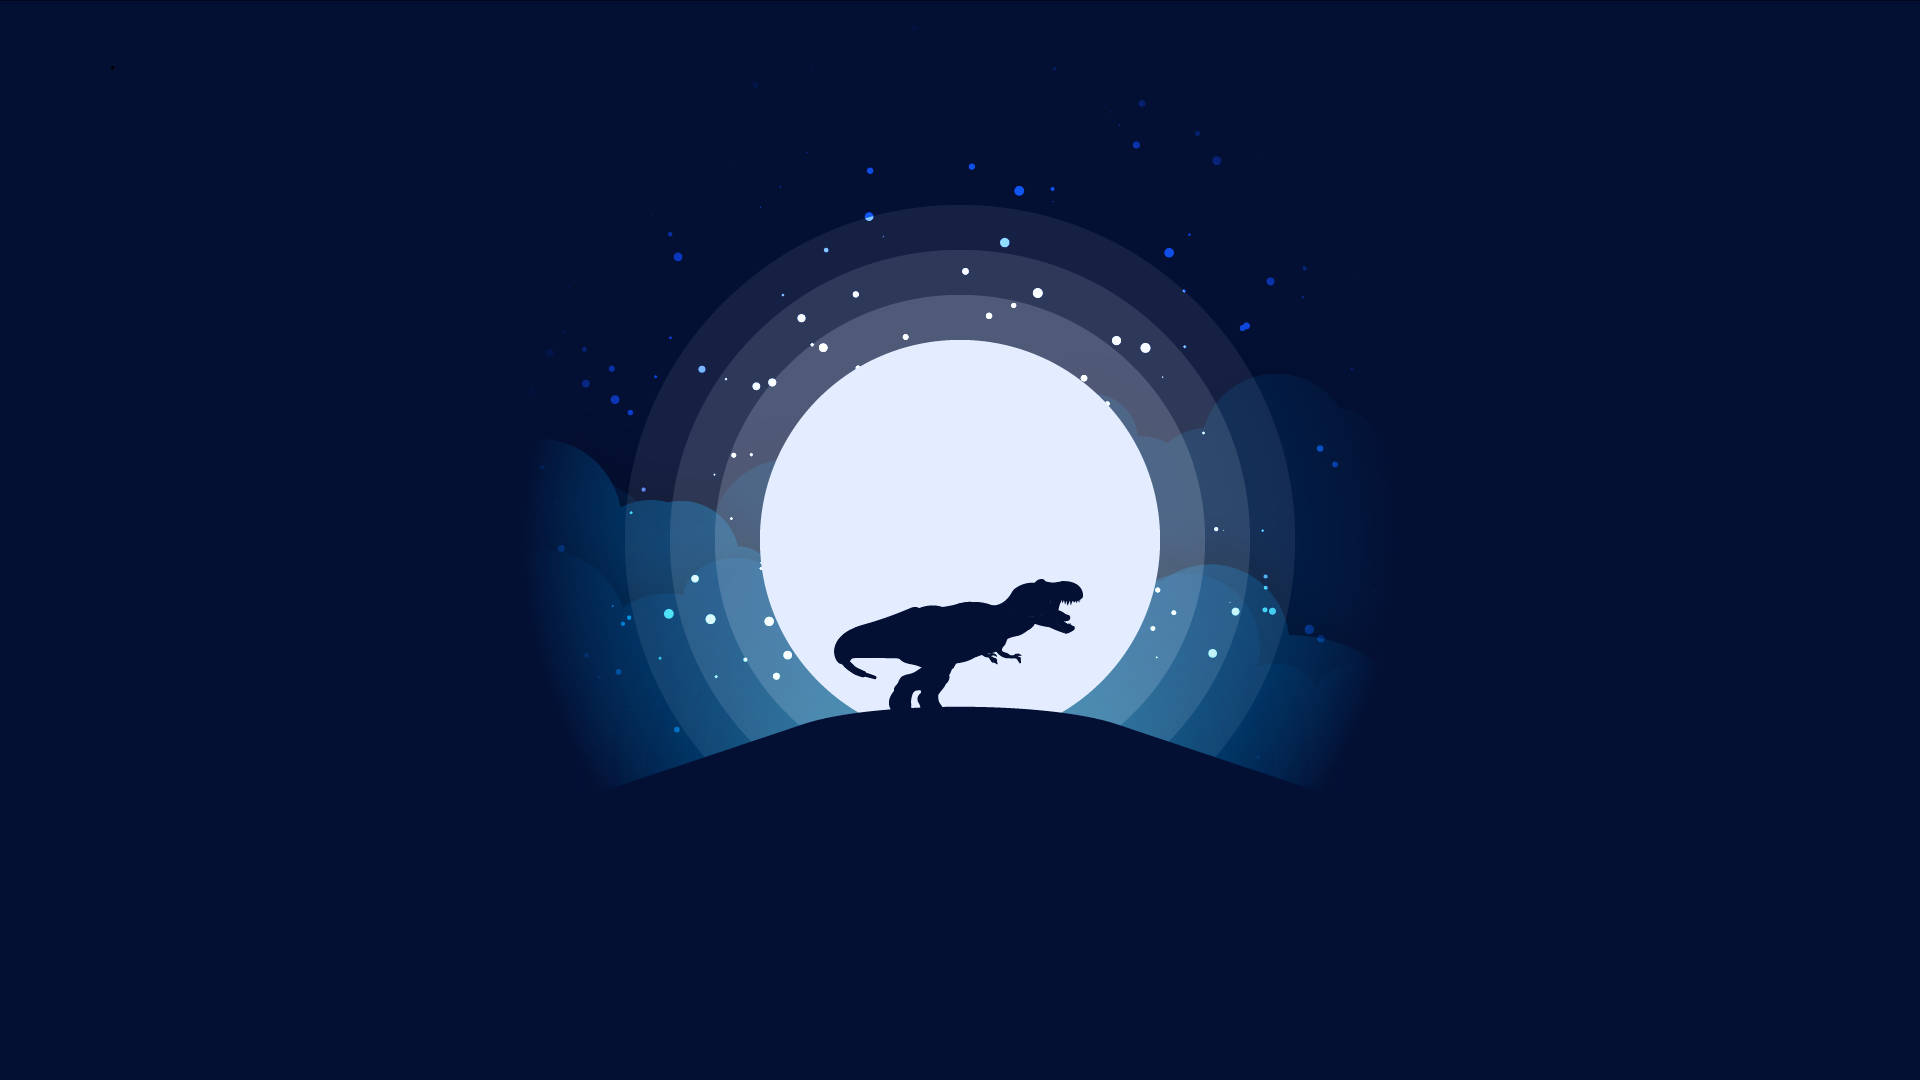 1920X1080 Dinosaur Wallpaper and Background